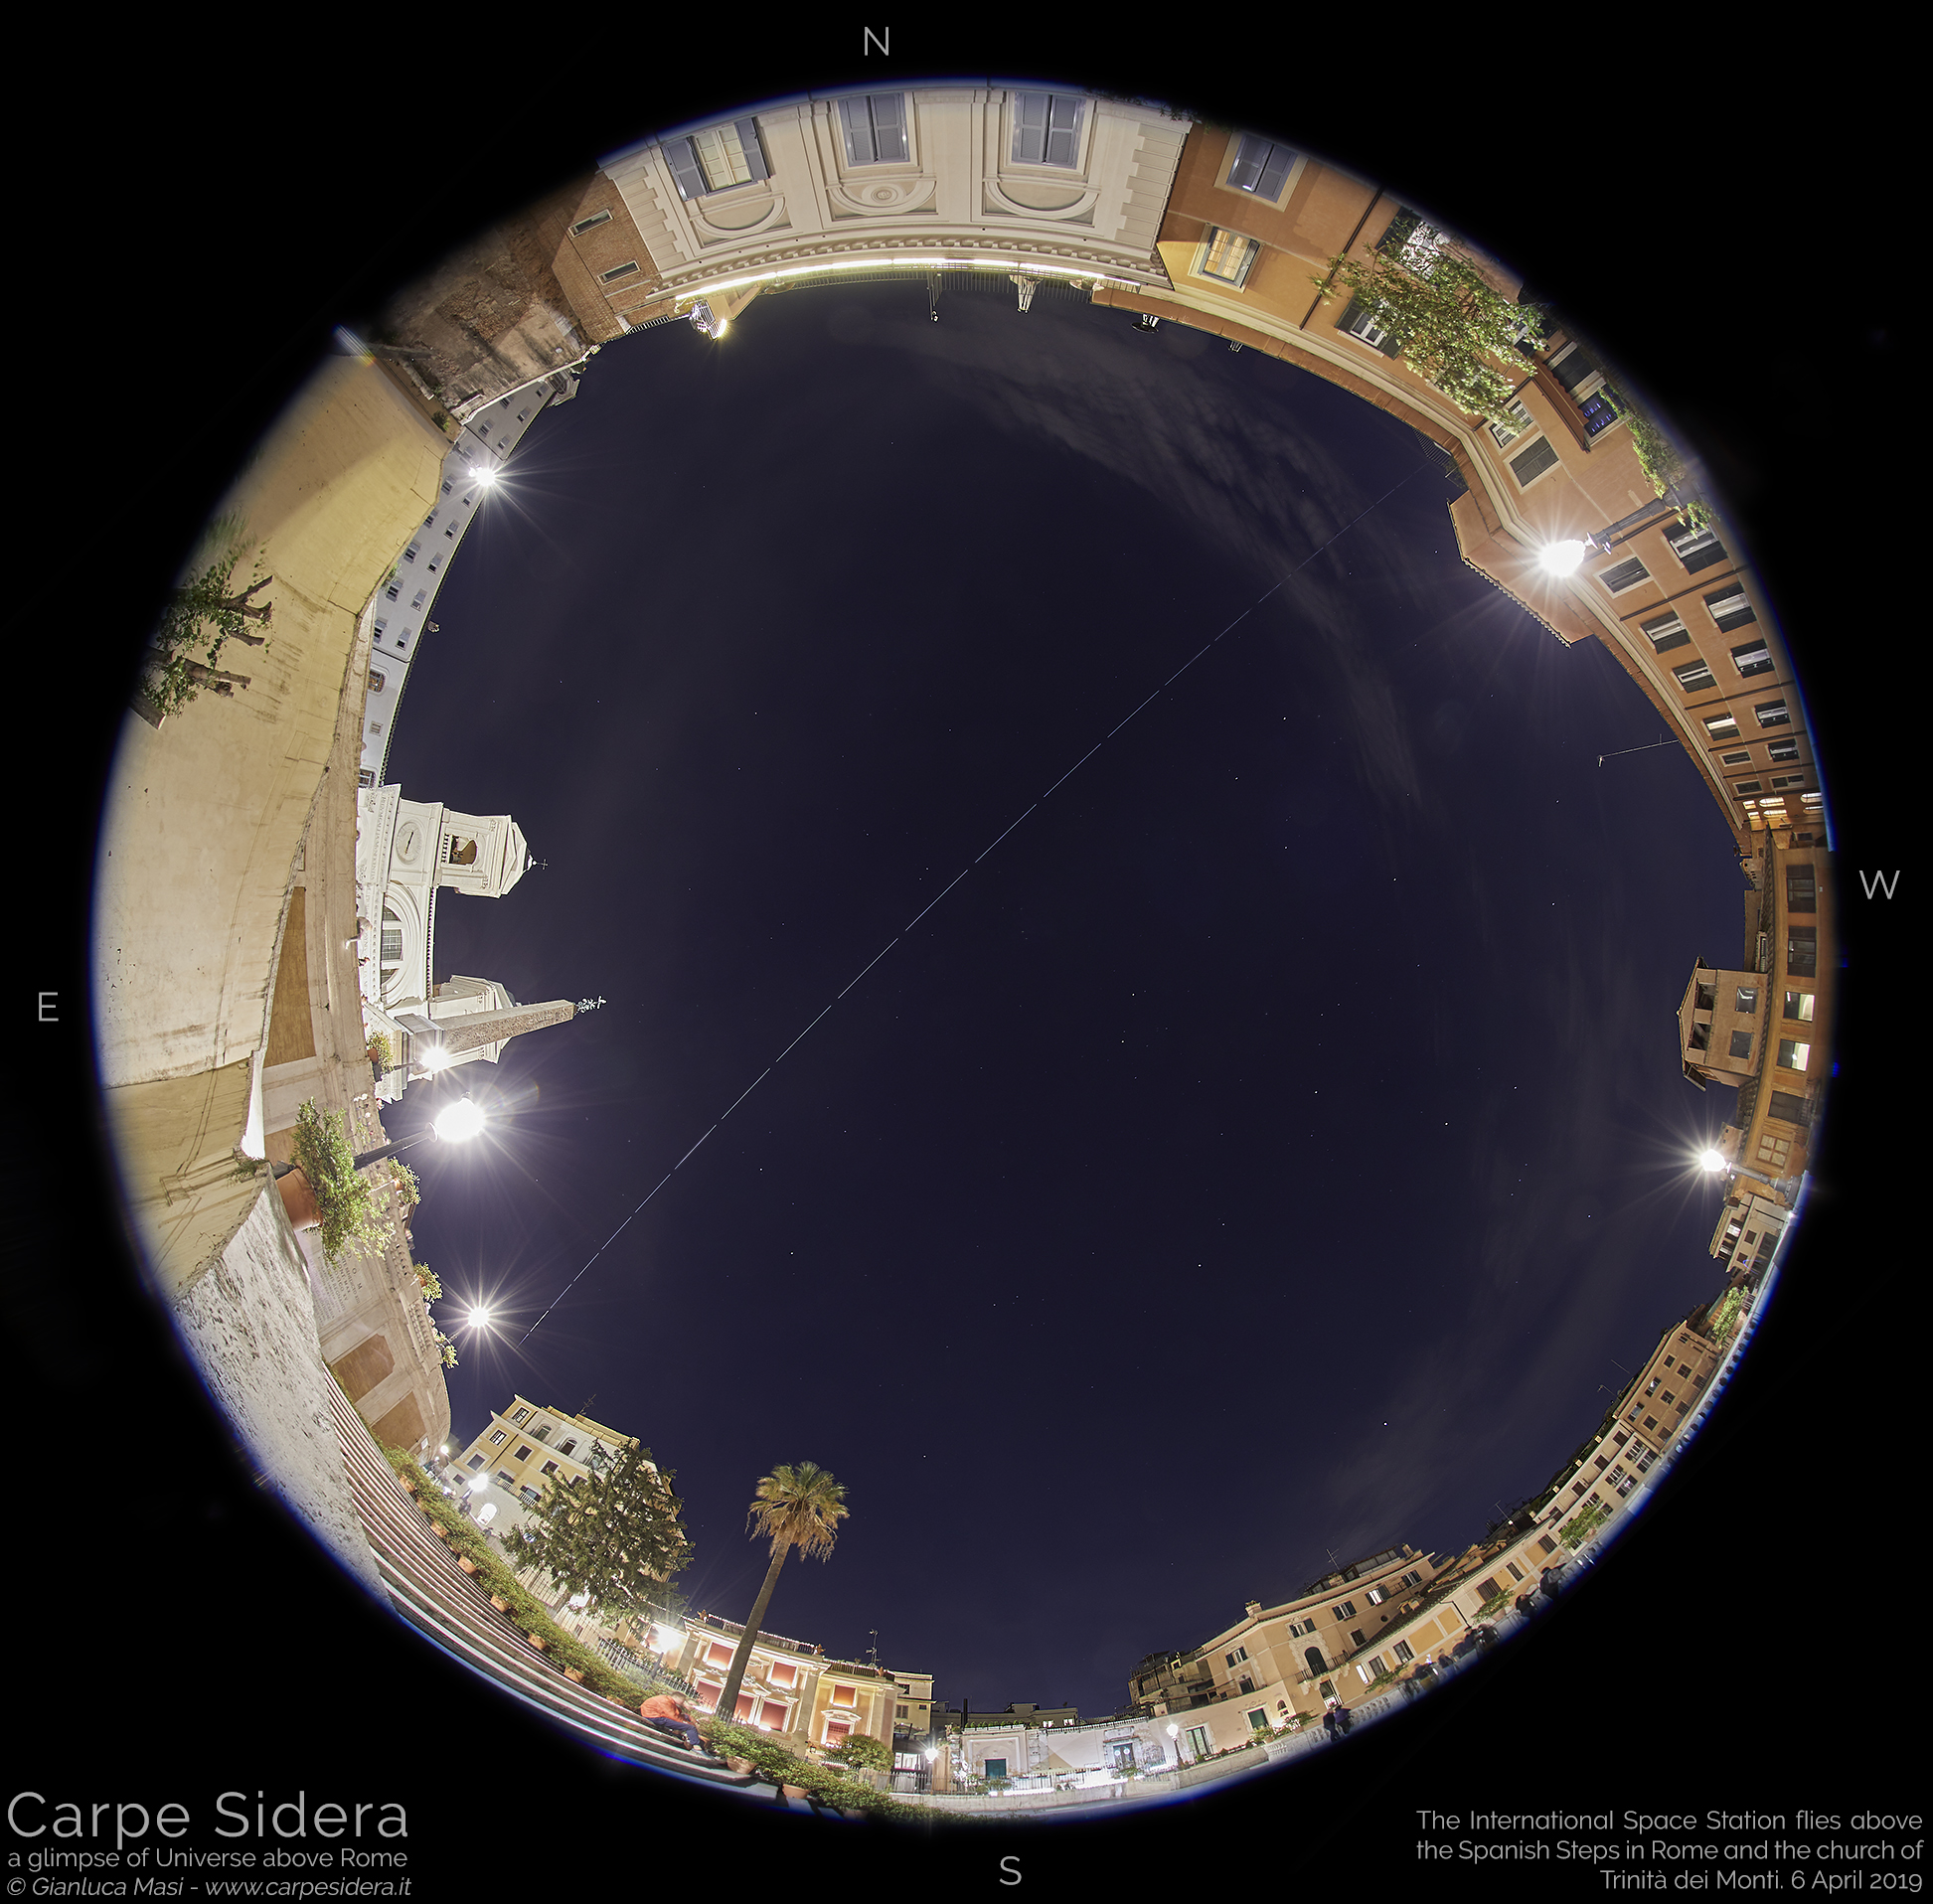 The International Space Station makes a spectacular pass above the Spanish Steps and Trinità dei Monti in Rome - 6 Apr. 2019